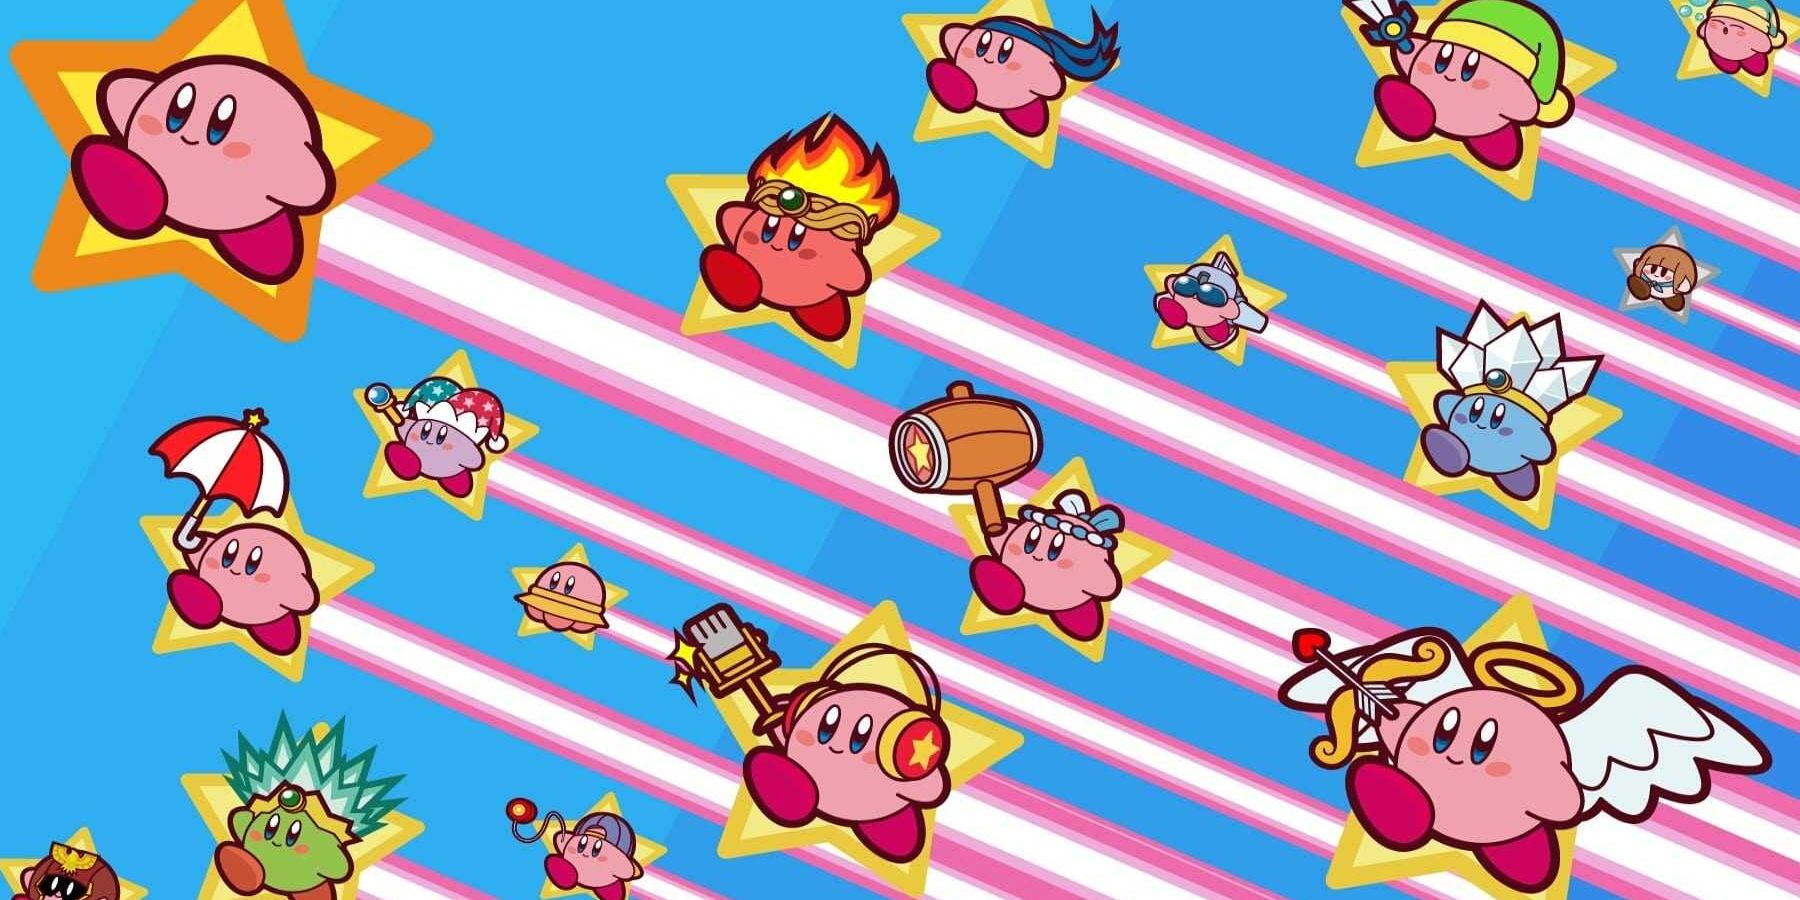 Wholesome Kirby Fan Animation Showcases Many Ways Kirby Can Fly